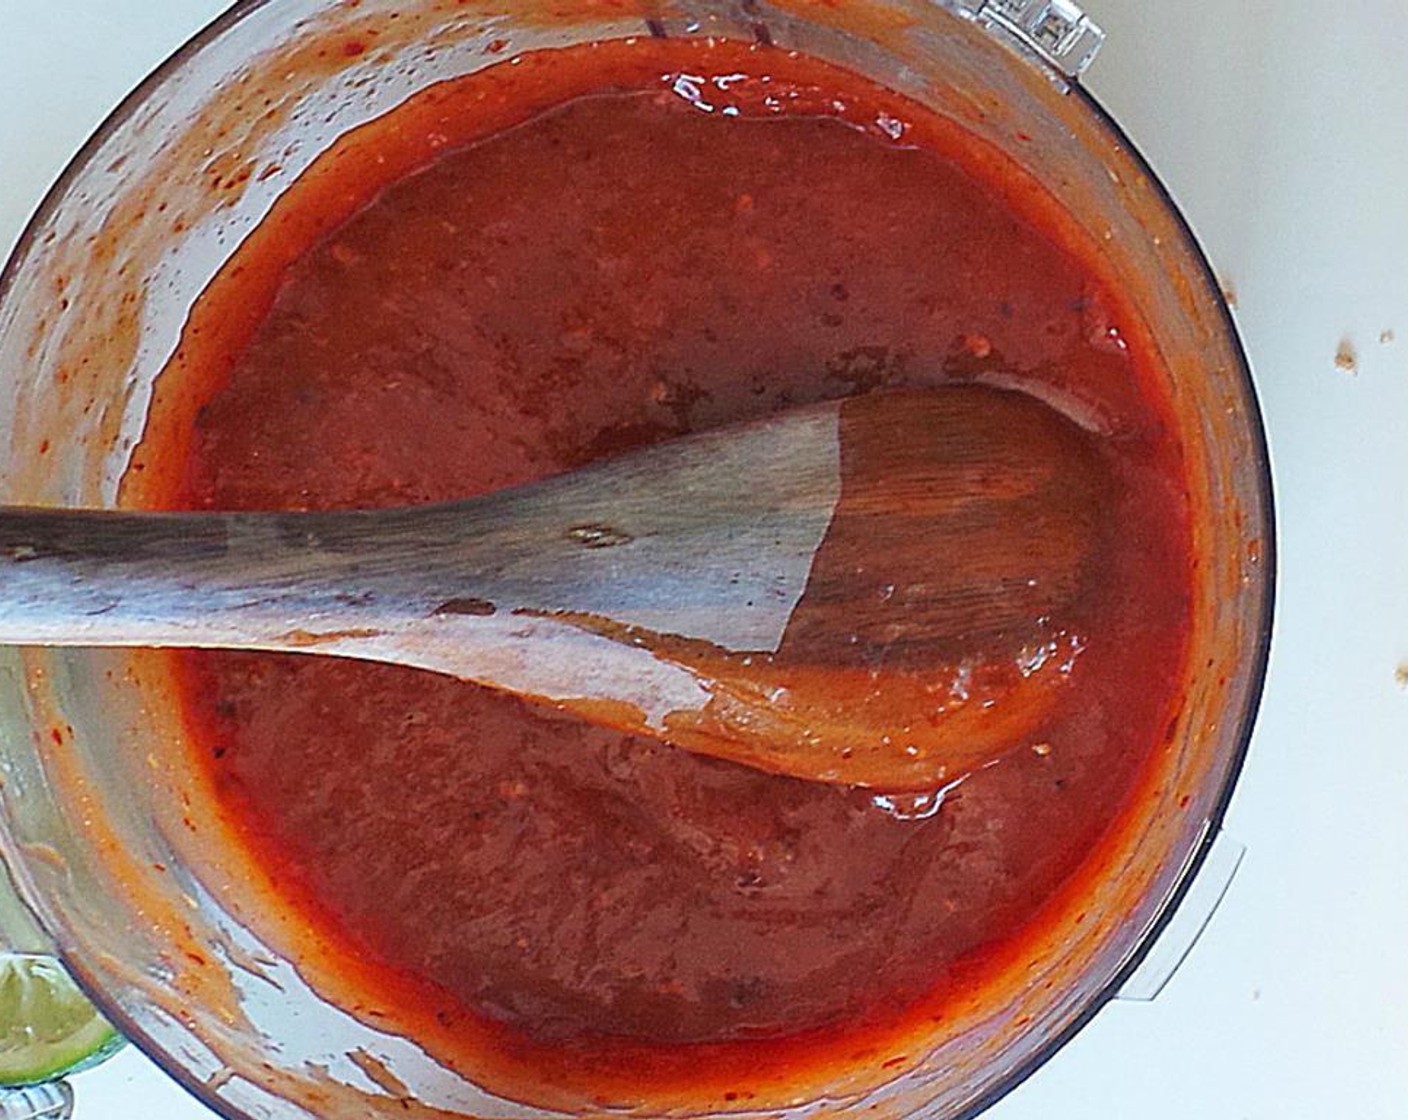 step 2 In a food processor, combine the Ketchup (1 cup), Honey (1/2 cup), Chipotle Peppers in Adobo Sauce (3), Fresh Ginger (1 in), and the juice of the Lime (1) and Orange (1). Save the peels. Then puree until smooth.